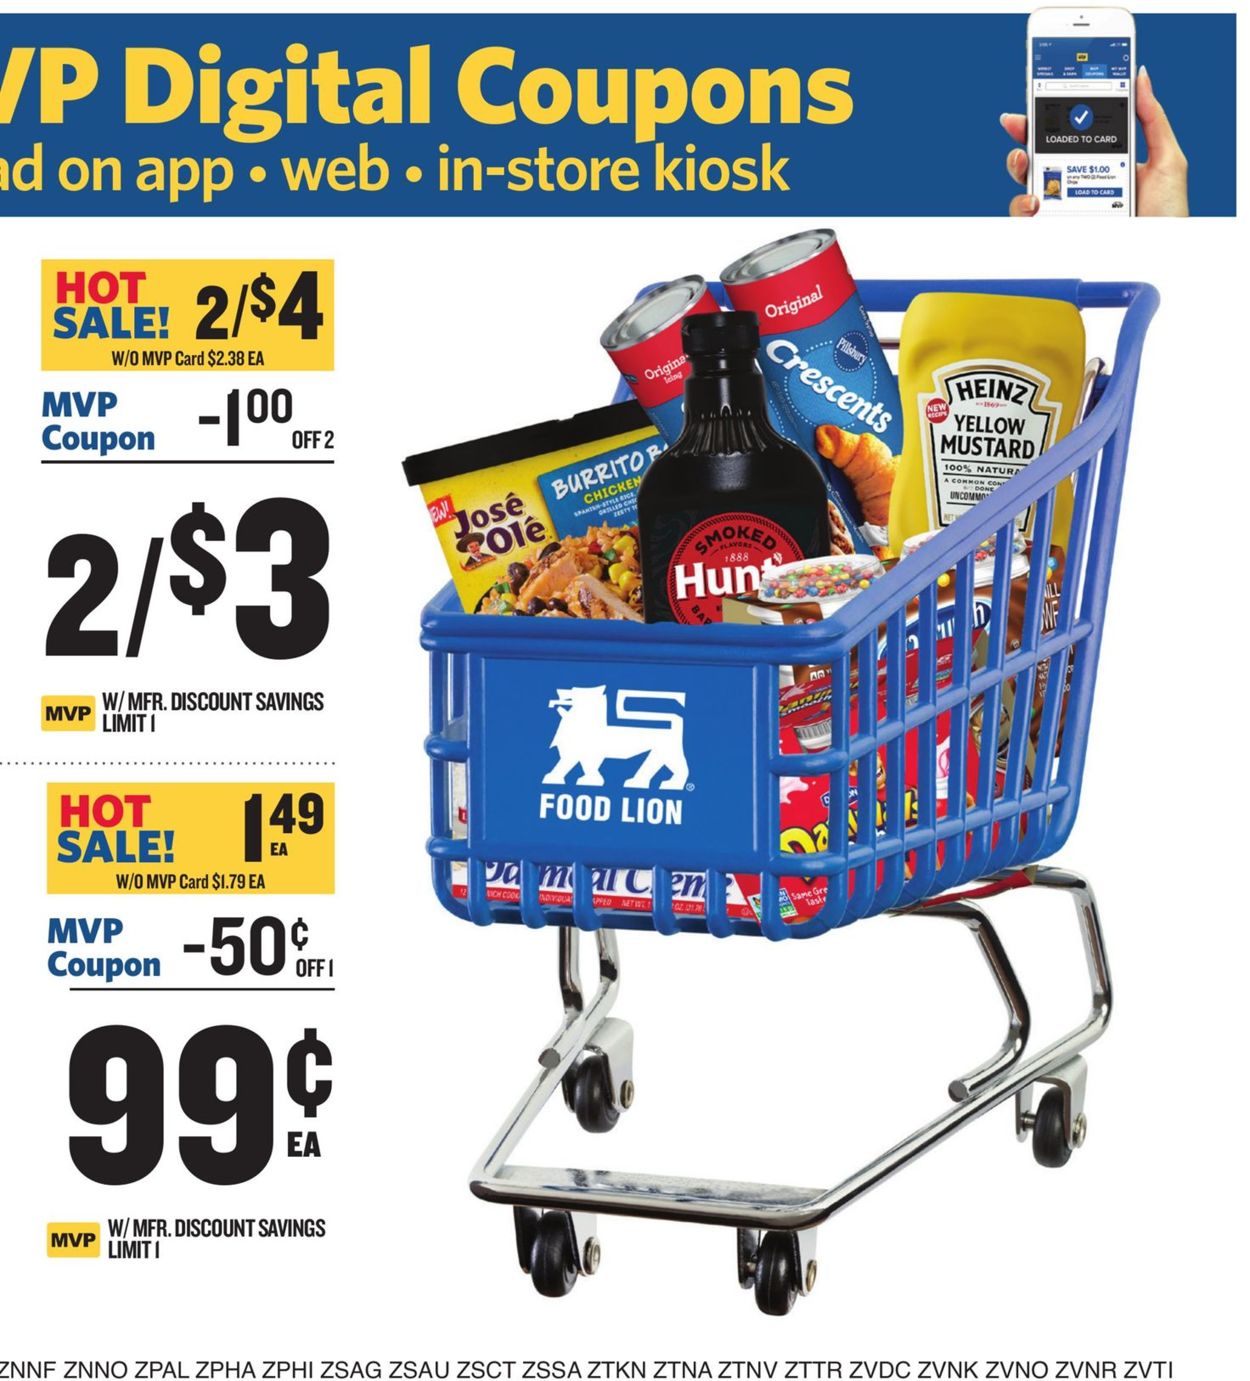 Food Lion Ad from 05/27/2020